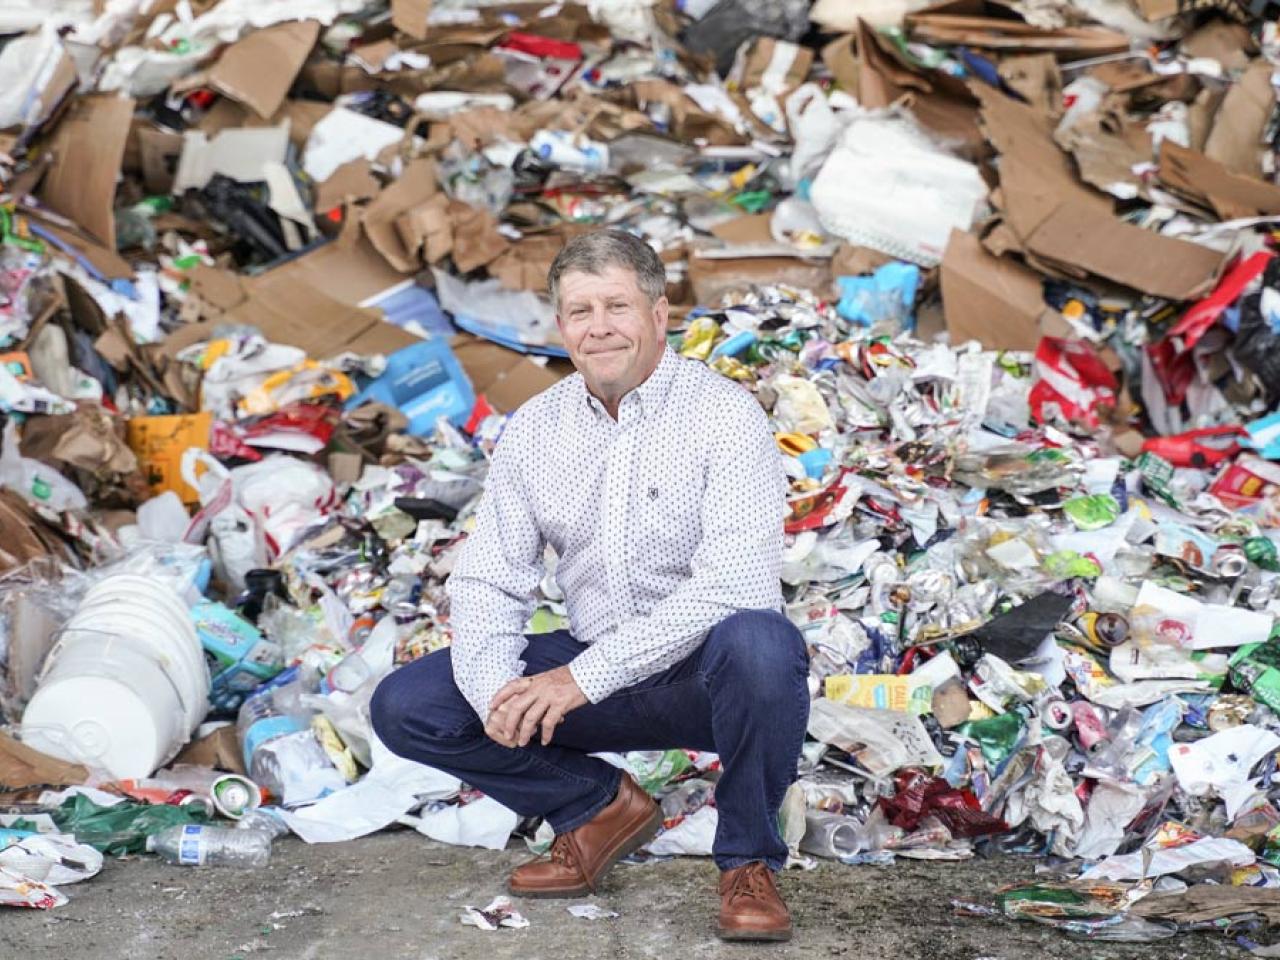 Napa Recycling general manager Greg Kelley at the company's facility where it processes recyclable materials it collects.